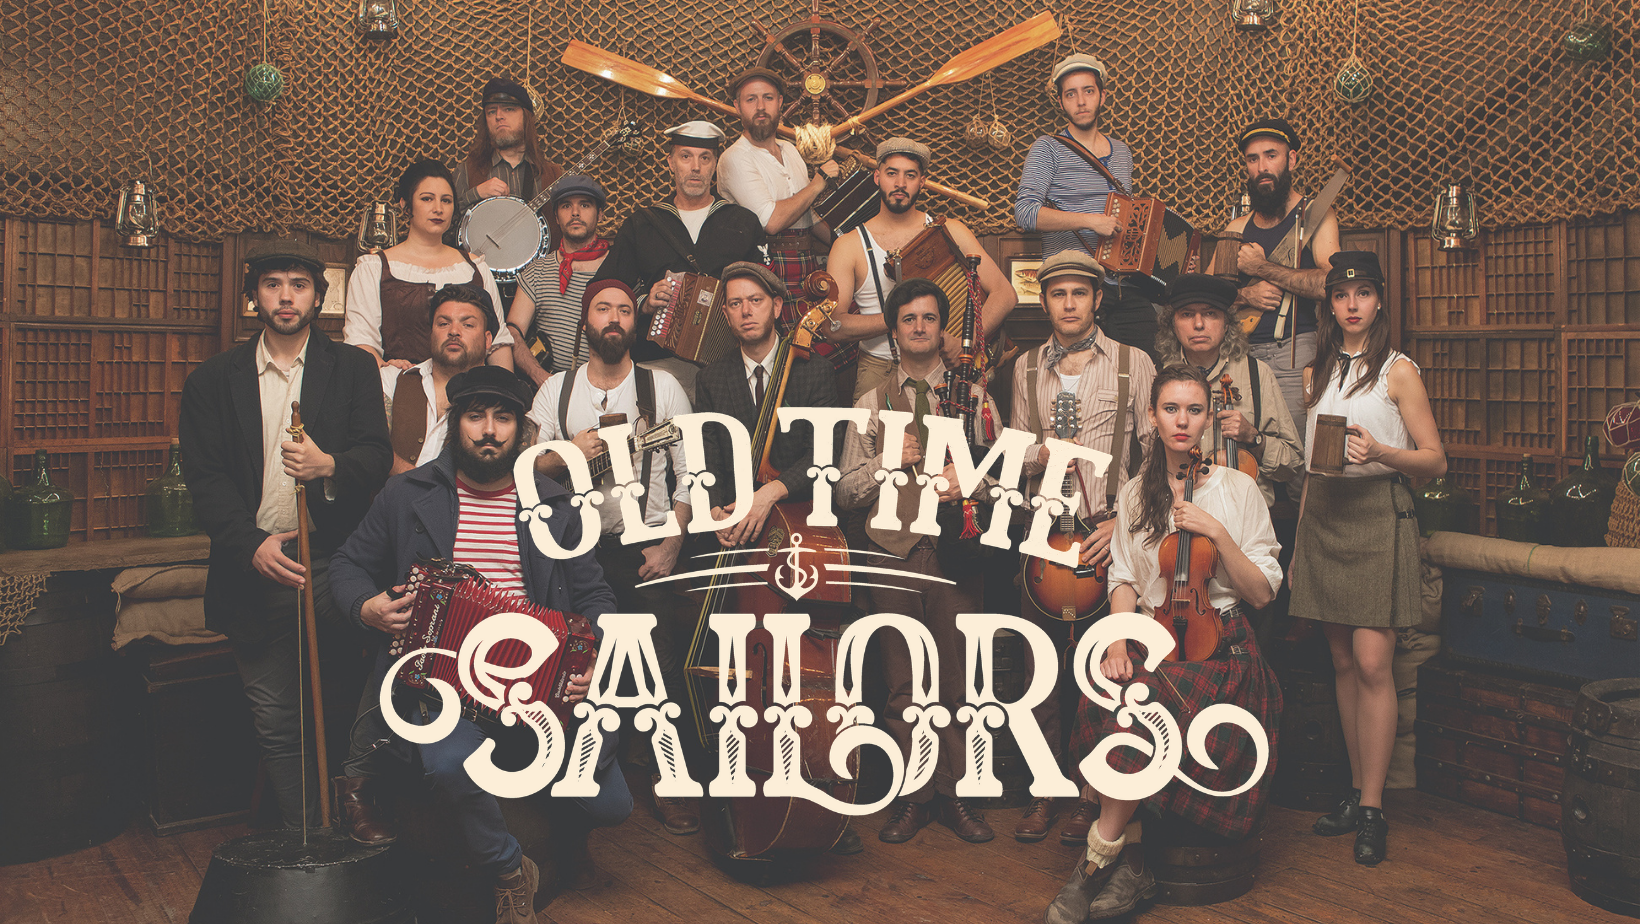 17 Sailors and the Old time sailor logo